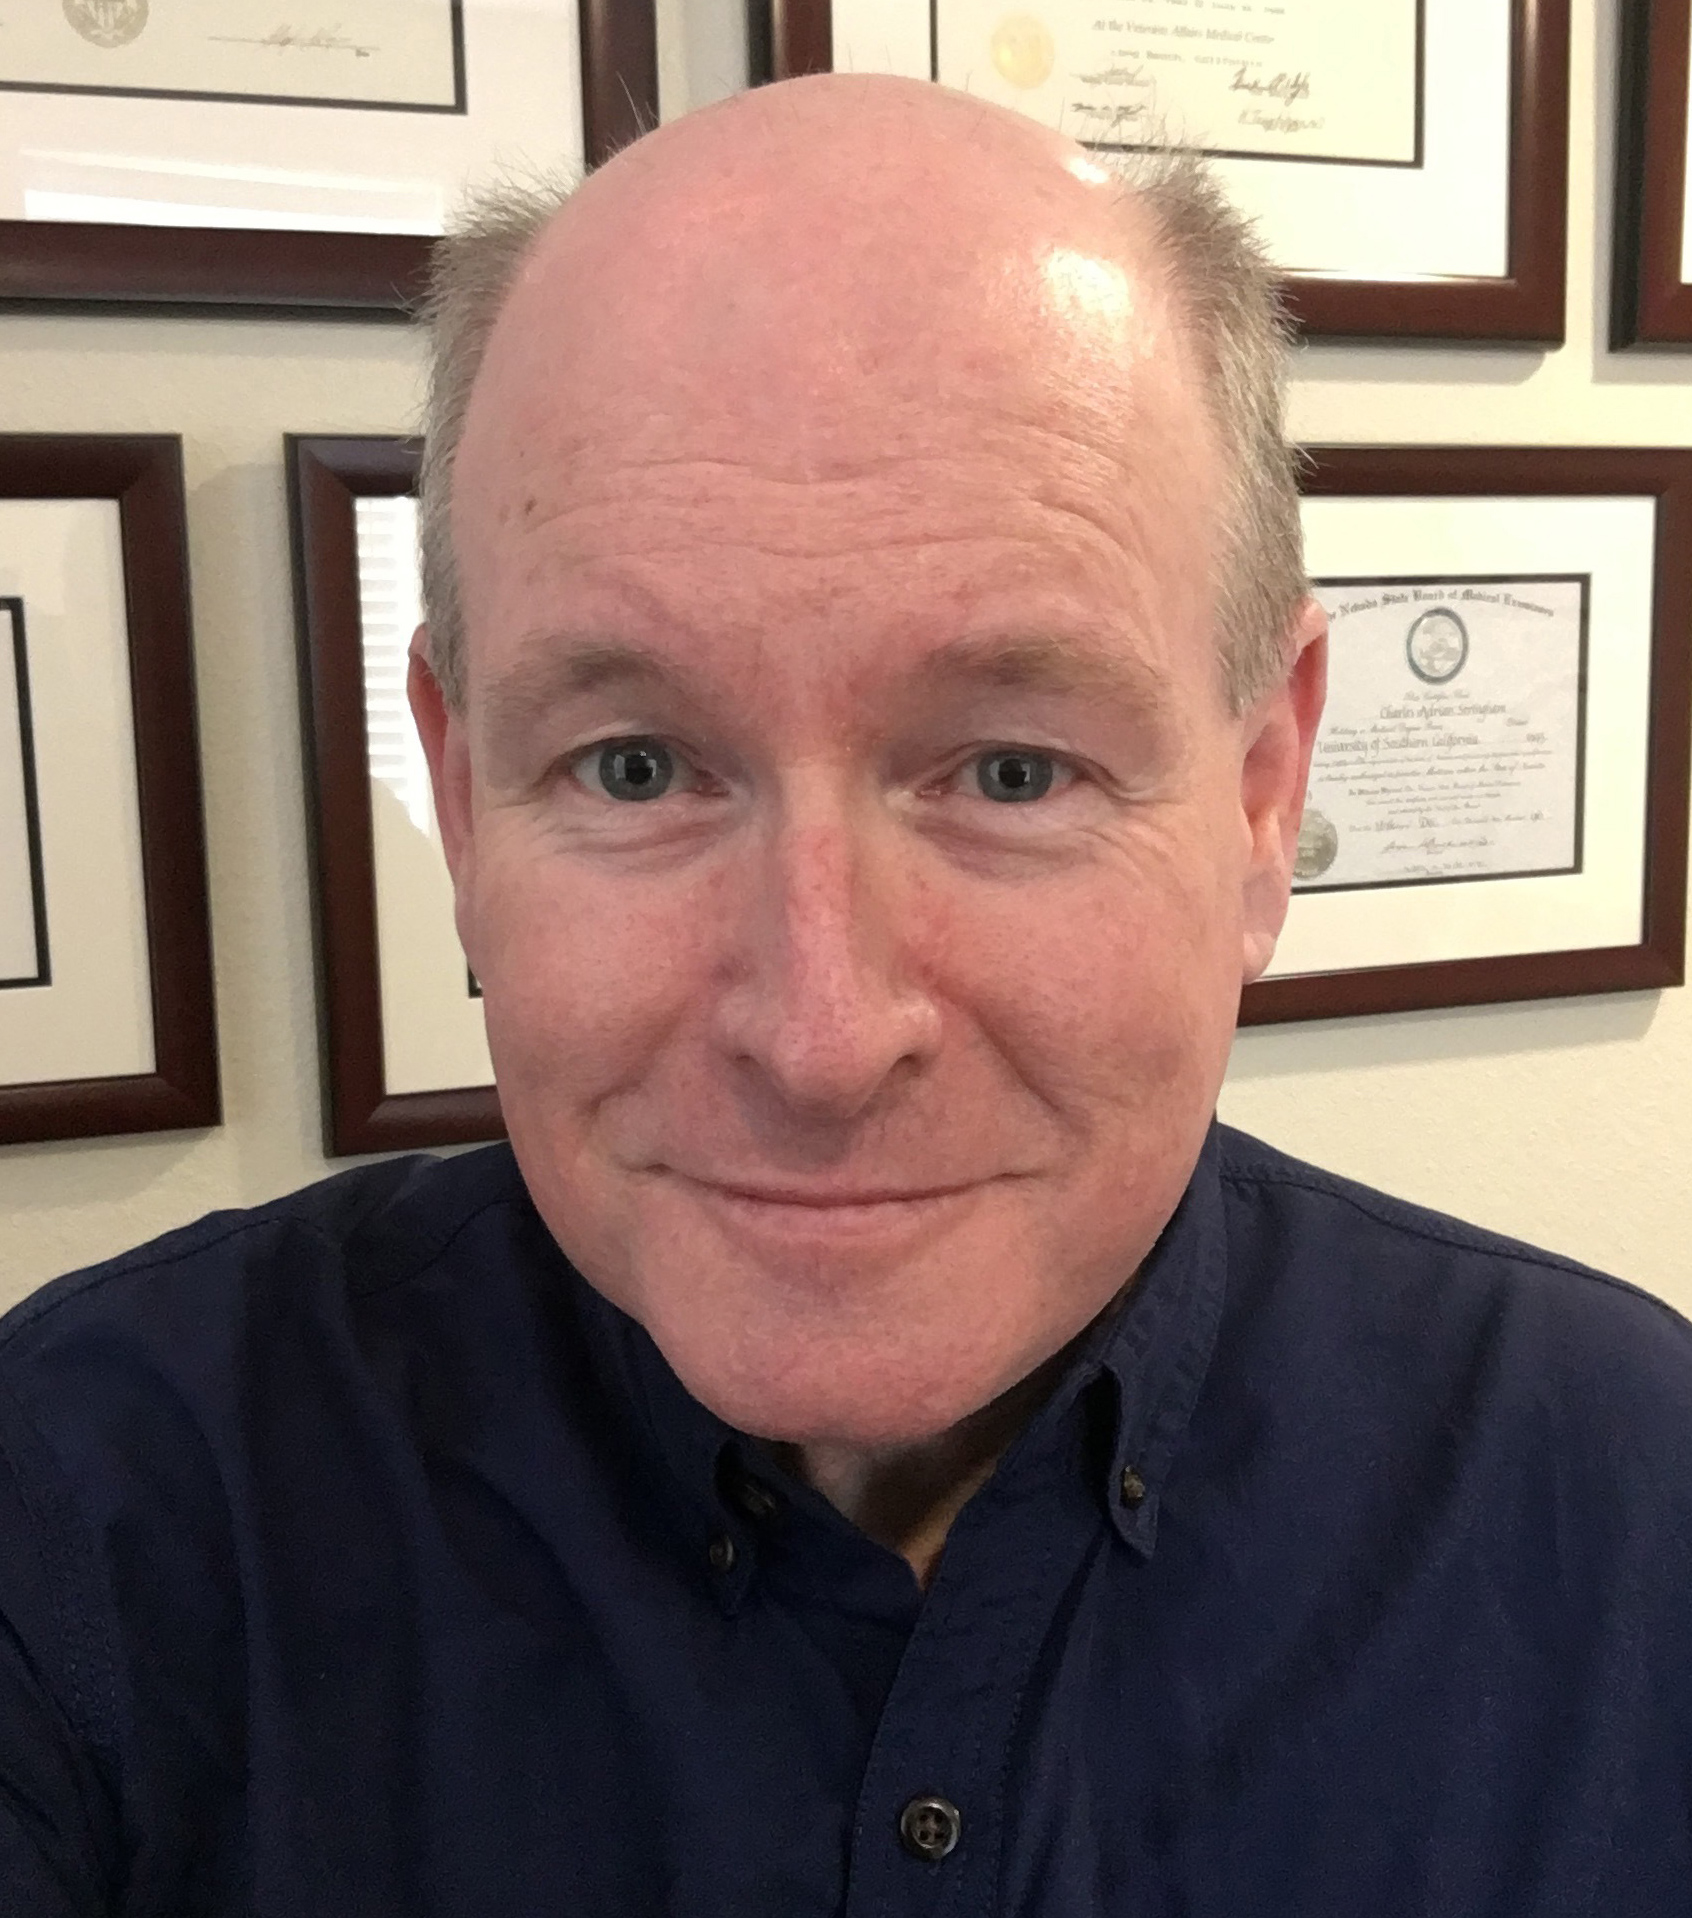 A photo shows a selfie of Dr. Charles Stringham.